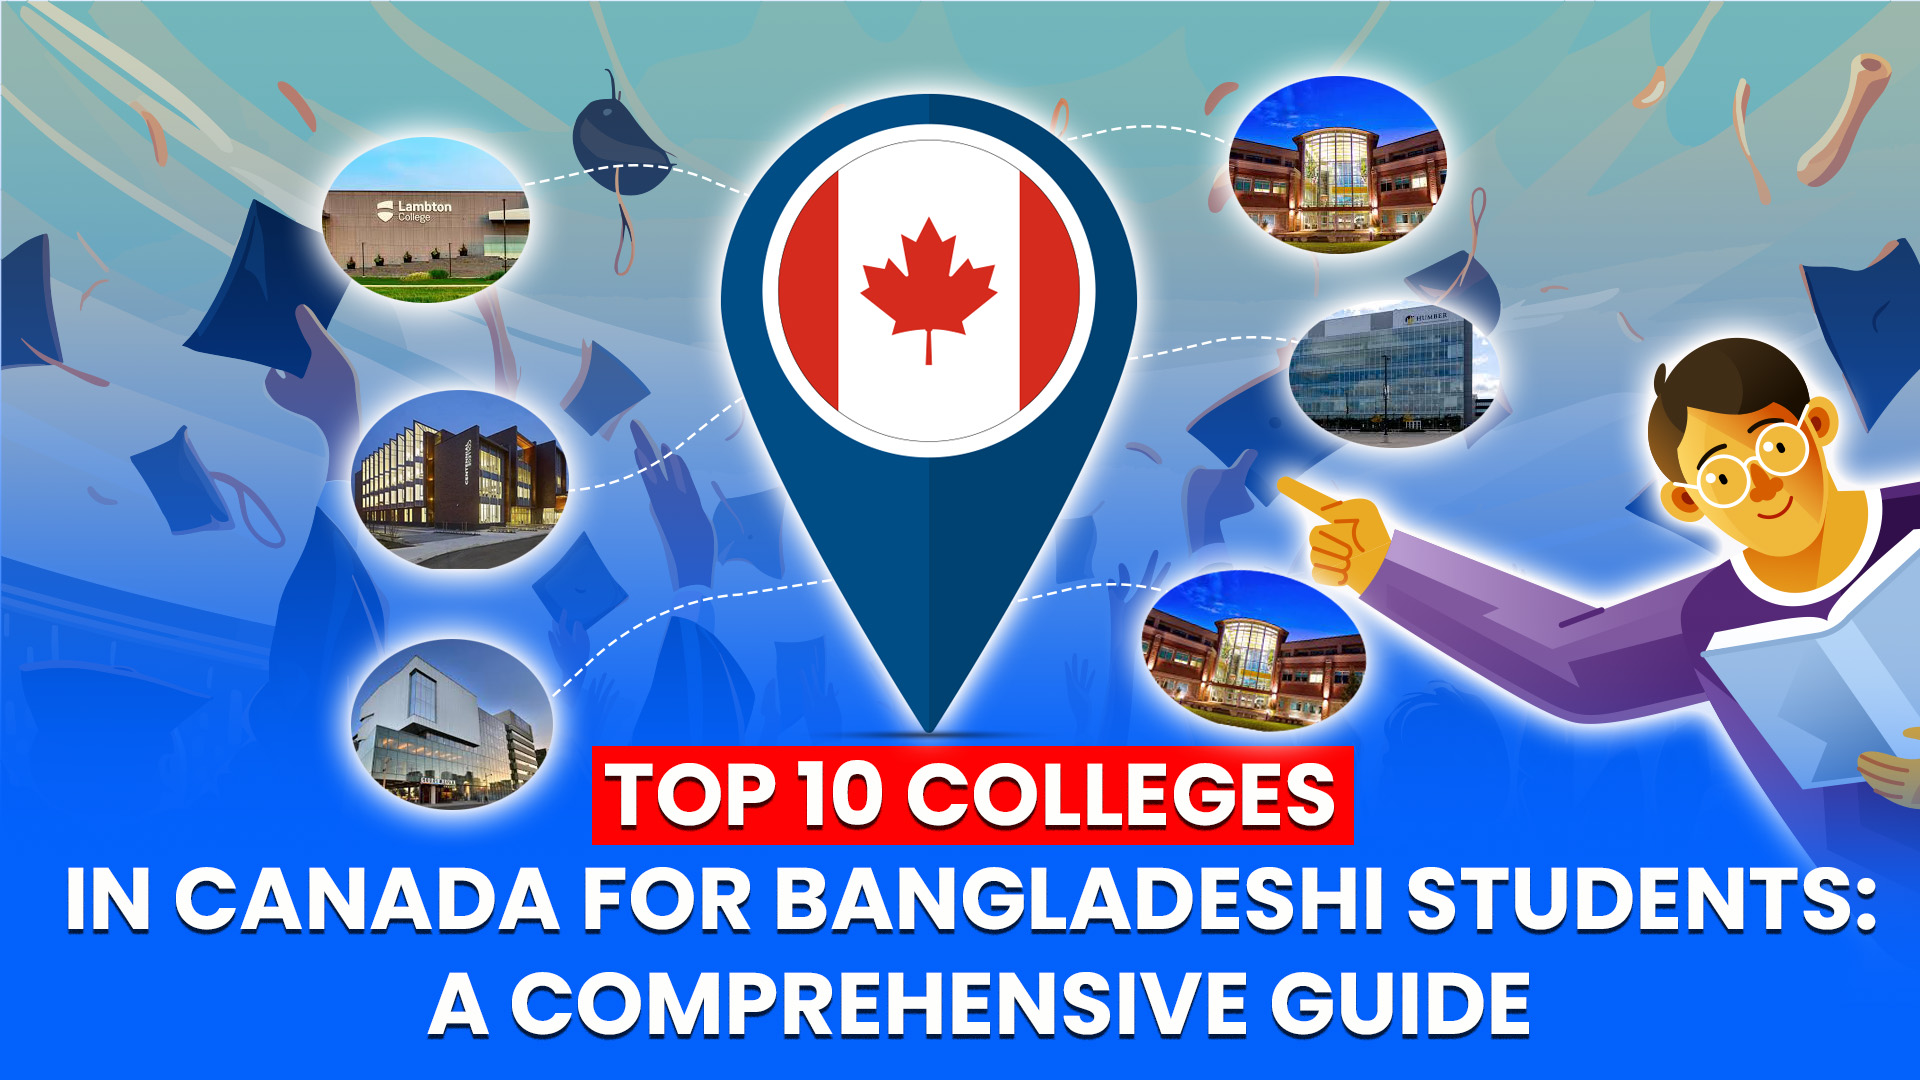 Top 10 Colleges in Canada for Bangladeshi Students: A Comprehensive Guide